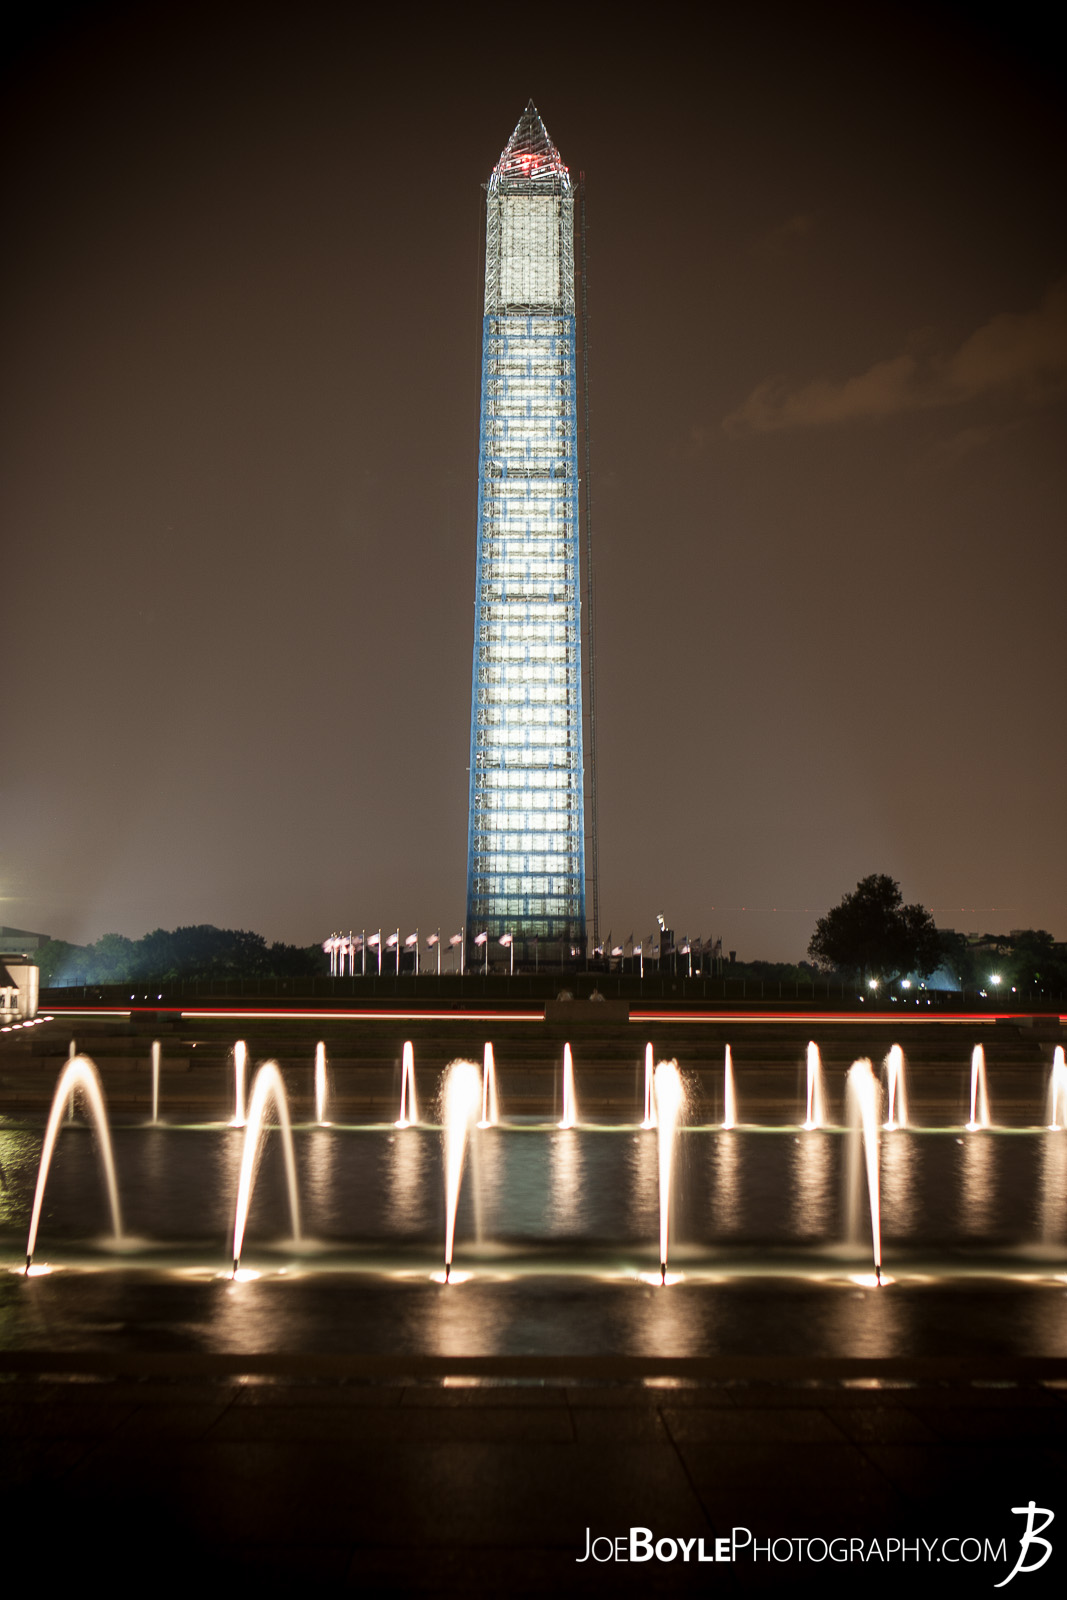  While I was in Washington, DC I was able to take some great night images of a few of the iconic landmarks that make up this city such as this image: The Washington Monument with the World War II Memorial Fountains in the foreground. 